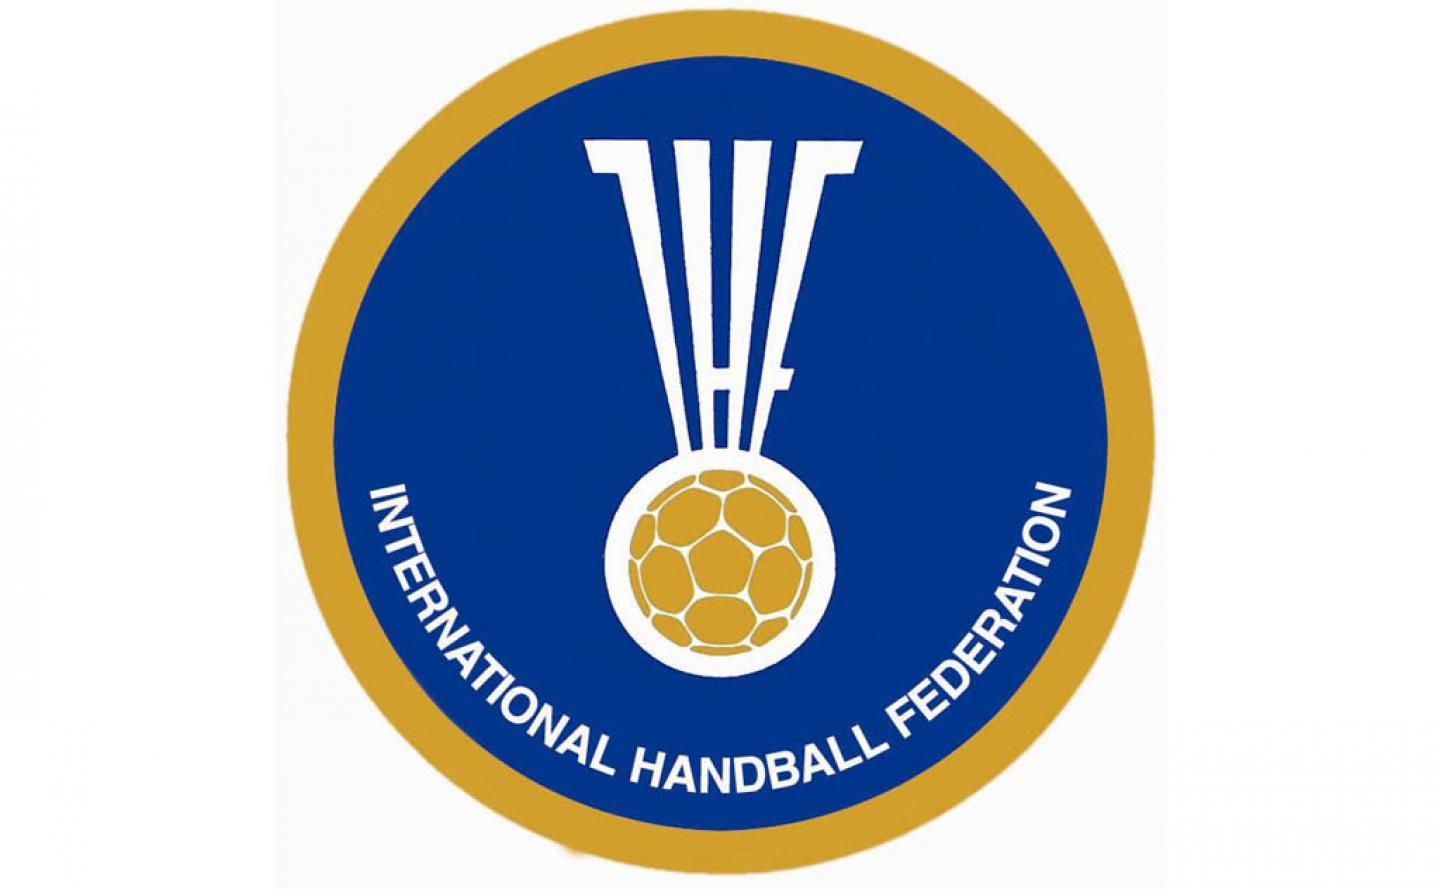 Candidates for IHF Athletes’ Commission